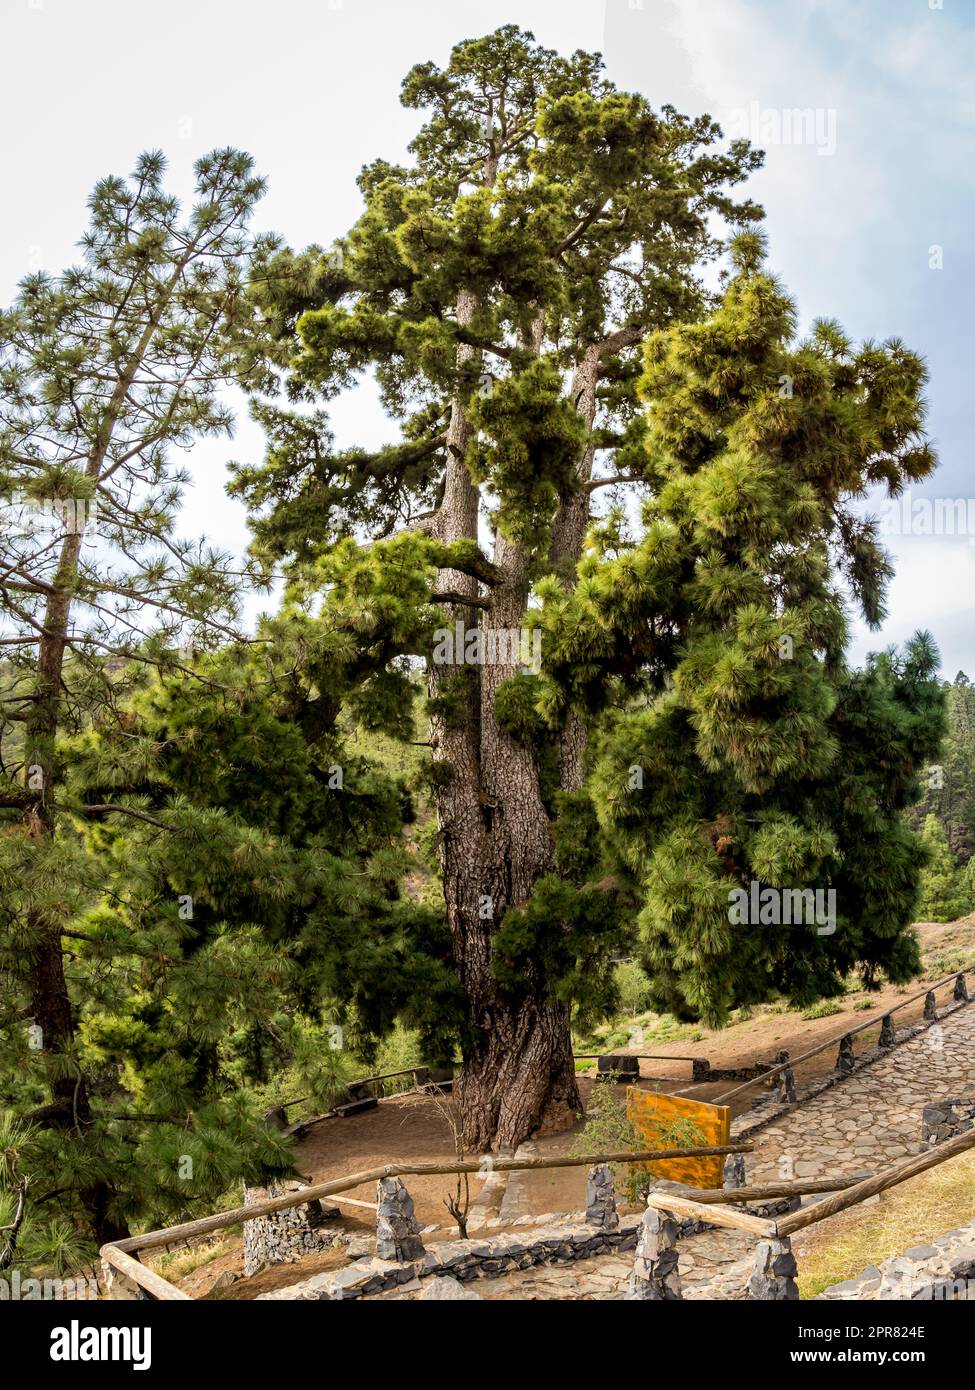 Magnificent Pino Gordo, a colossal pinus canariensis tree near Vilaflor de Chasna, offering an extraordinary view of its gigantic size. Stock Photo